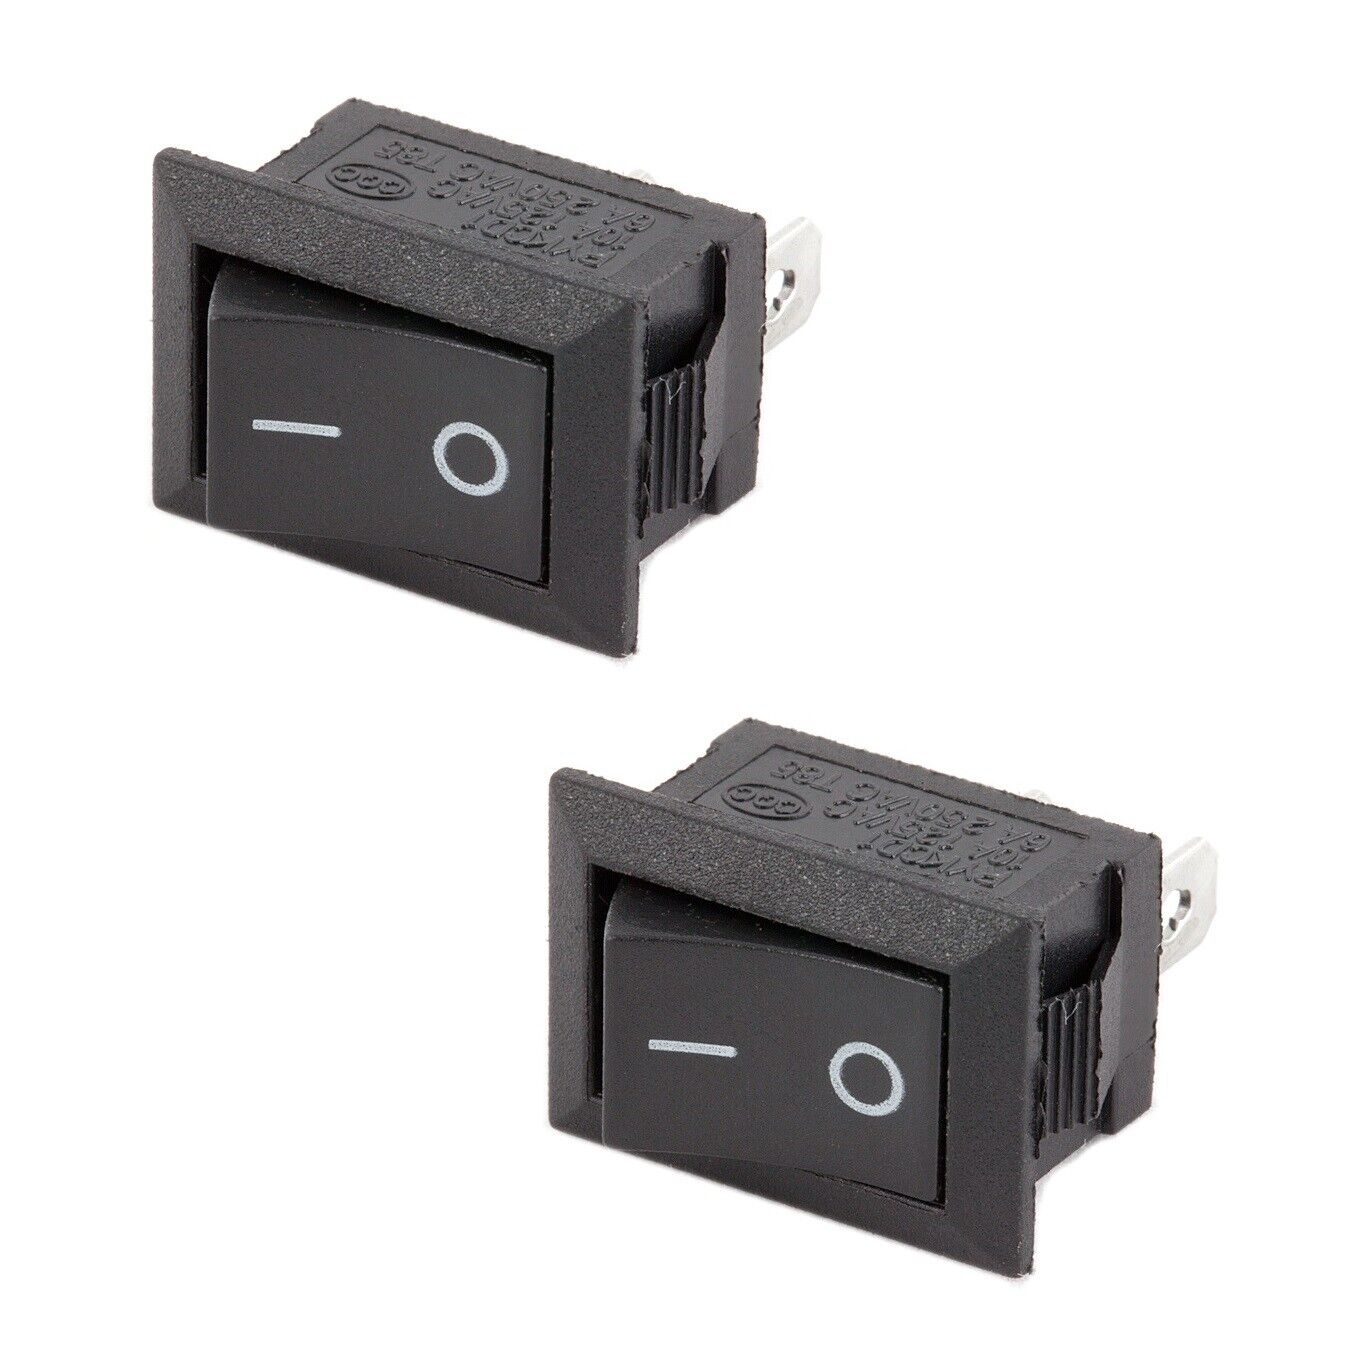 2x Small On/Off Switch Black Rocker DC 12V Push-In General All Purpose Universal